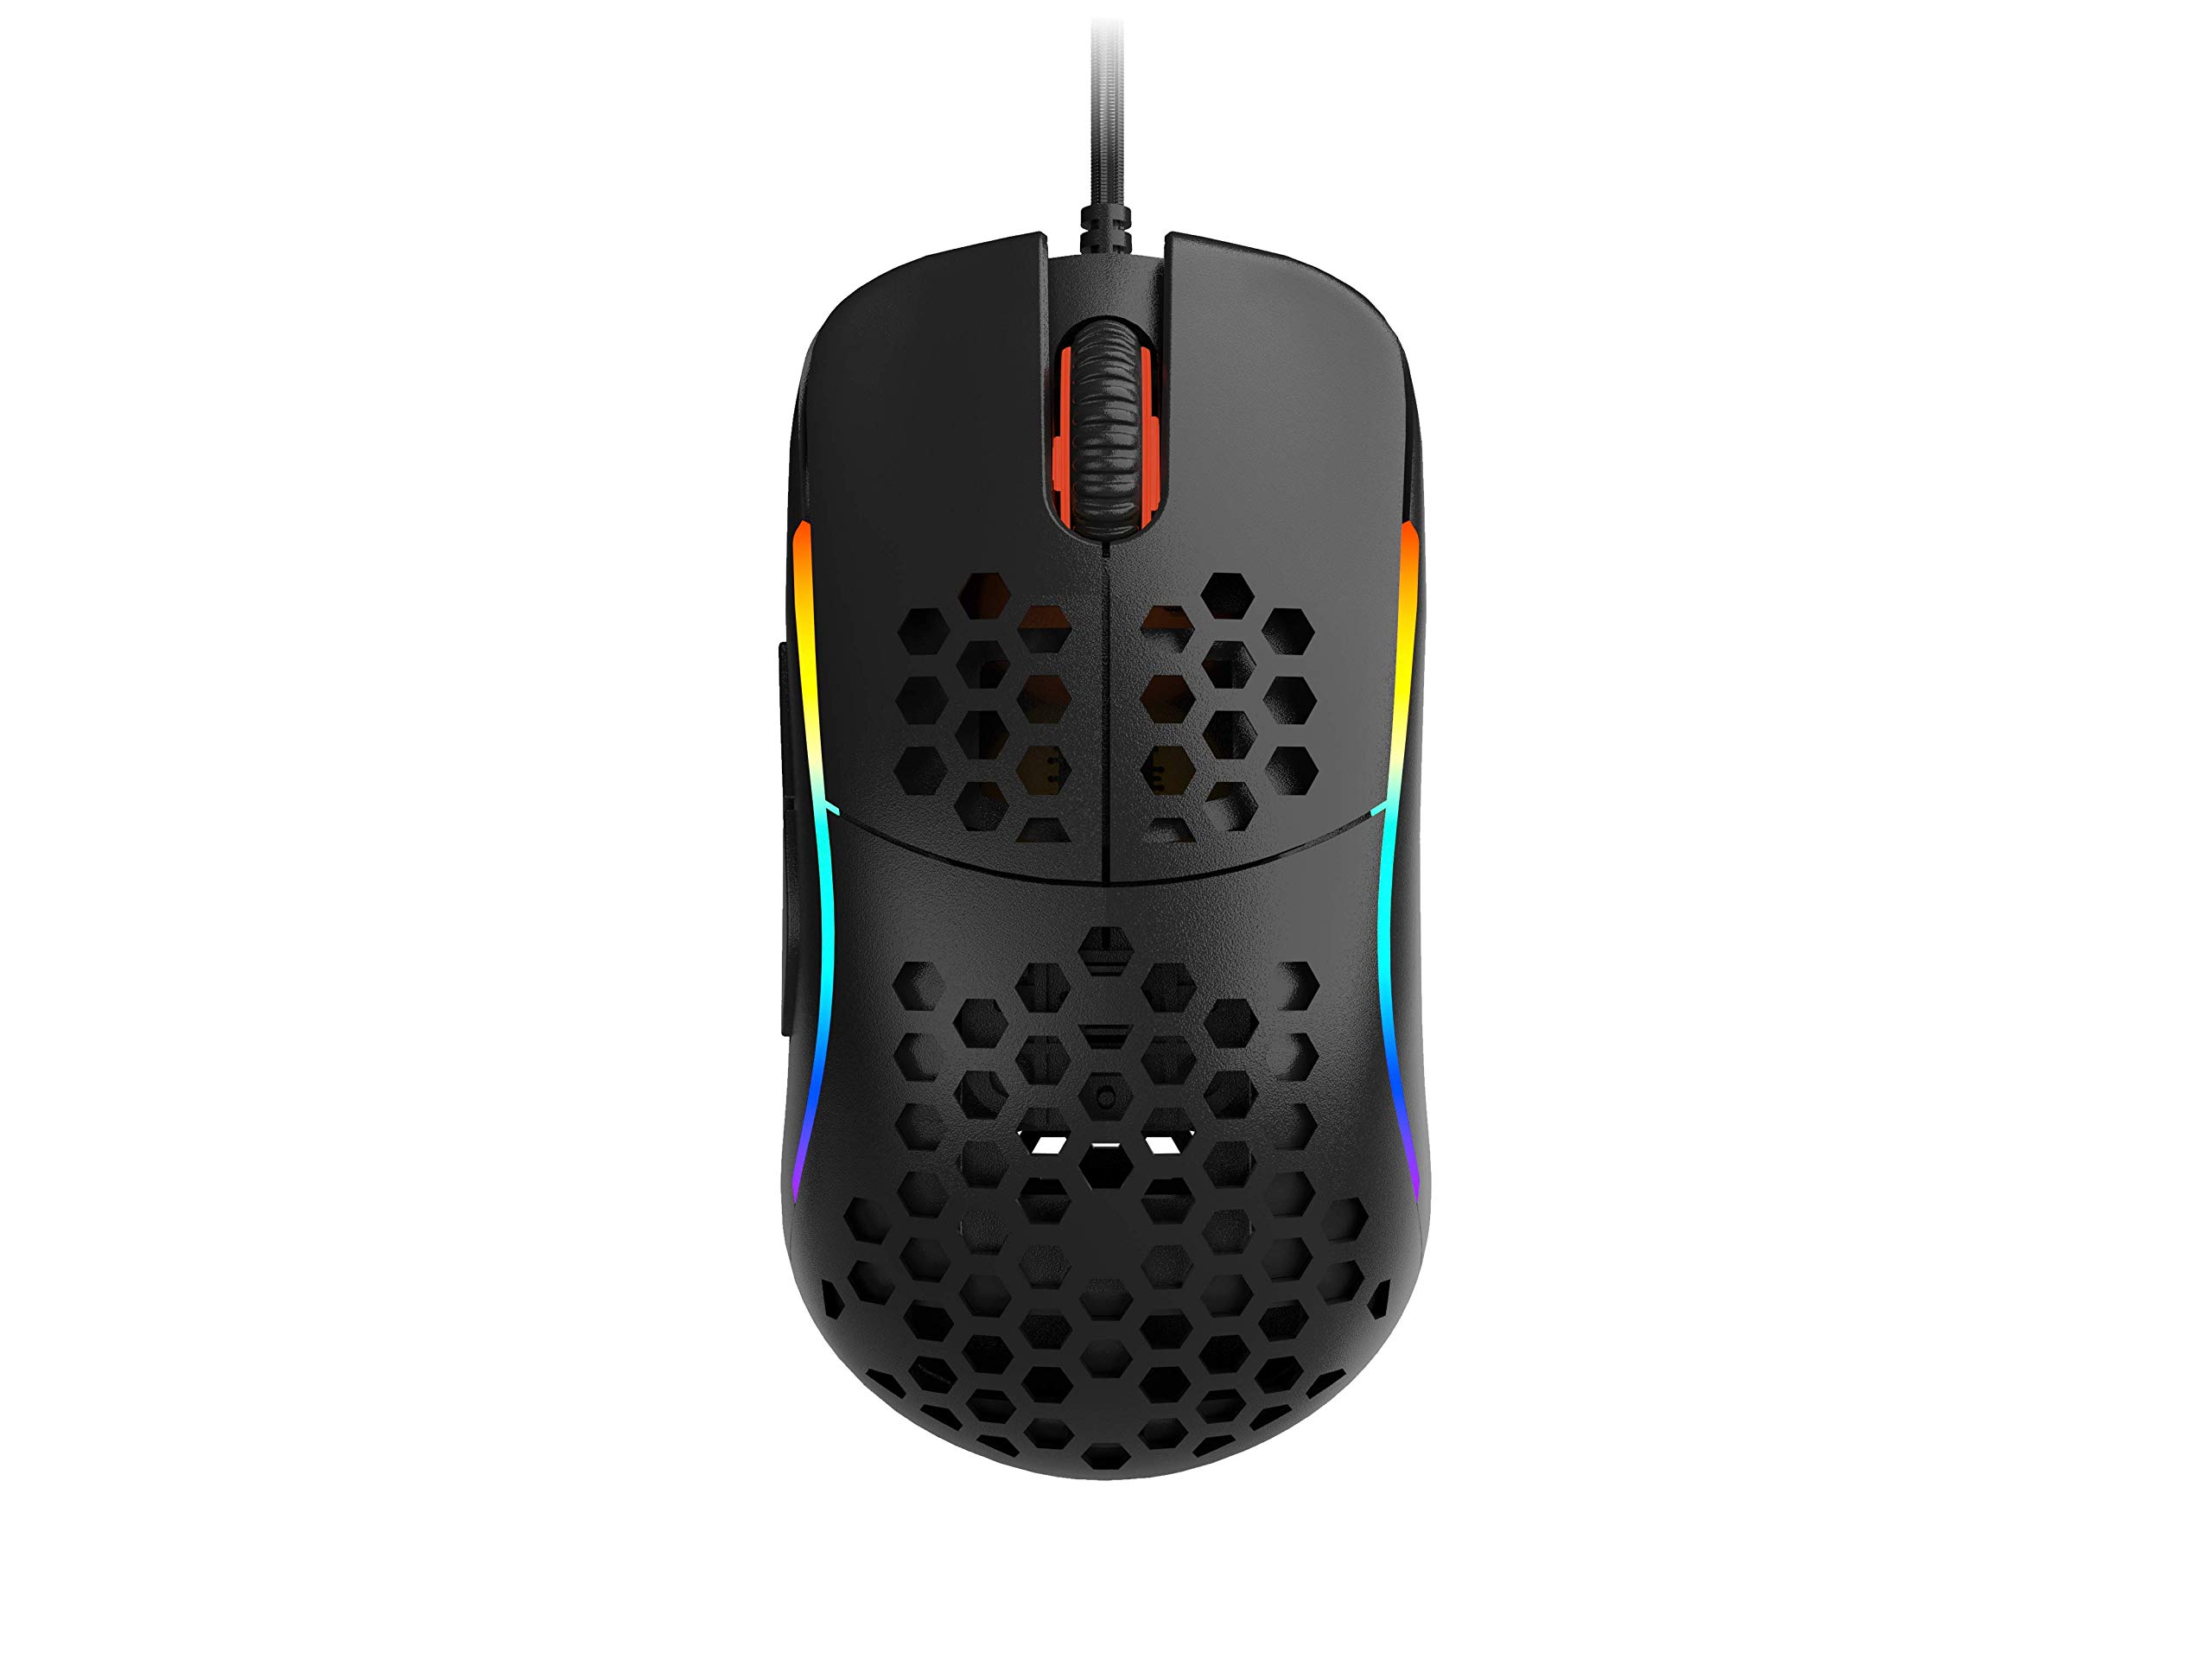 HK Gaming NAOS M Ultra Lightweight Honeycomb Shell Ambidextrous Wired RGB Gaming Mouse 12 000 cpi - 7 Buttons - 59 g (Naos-M, Black)